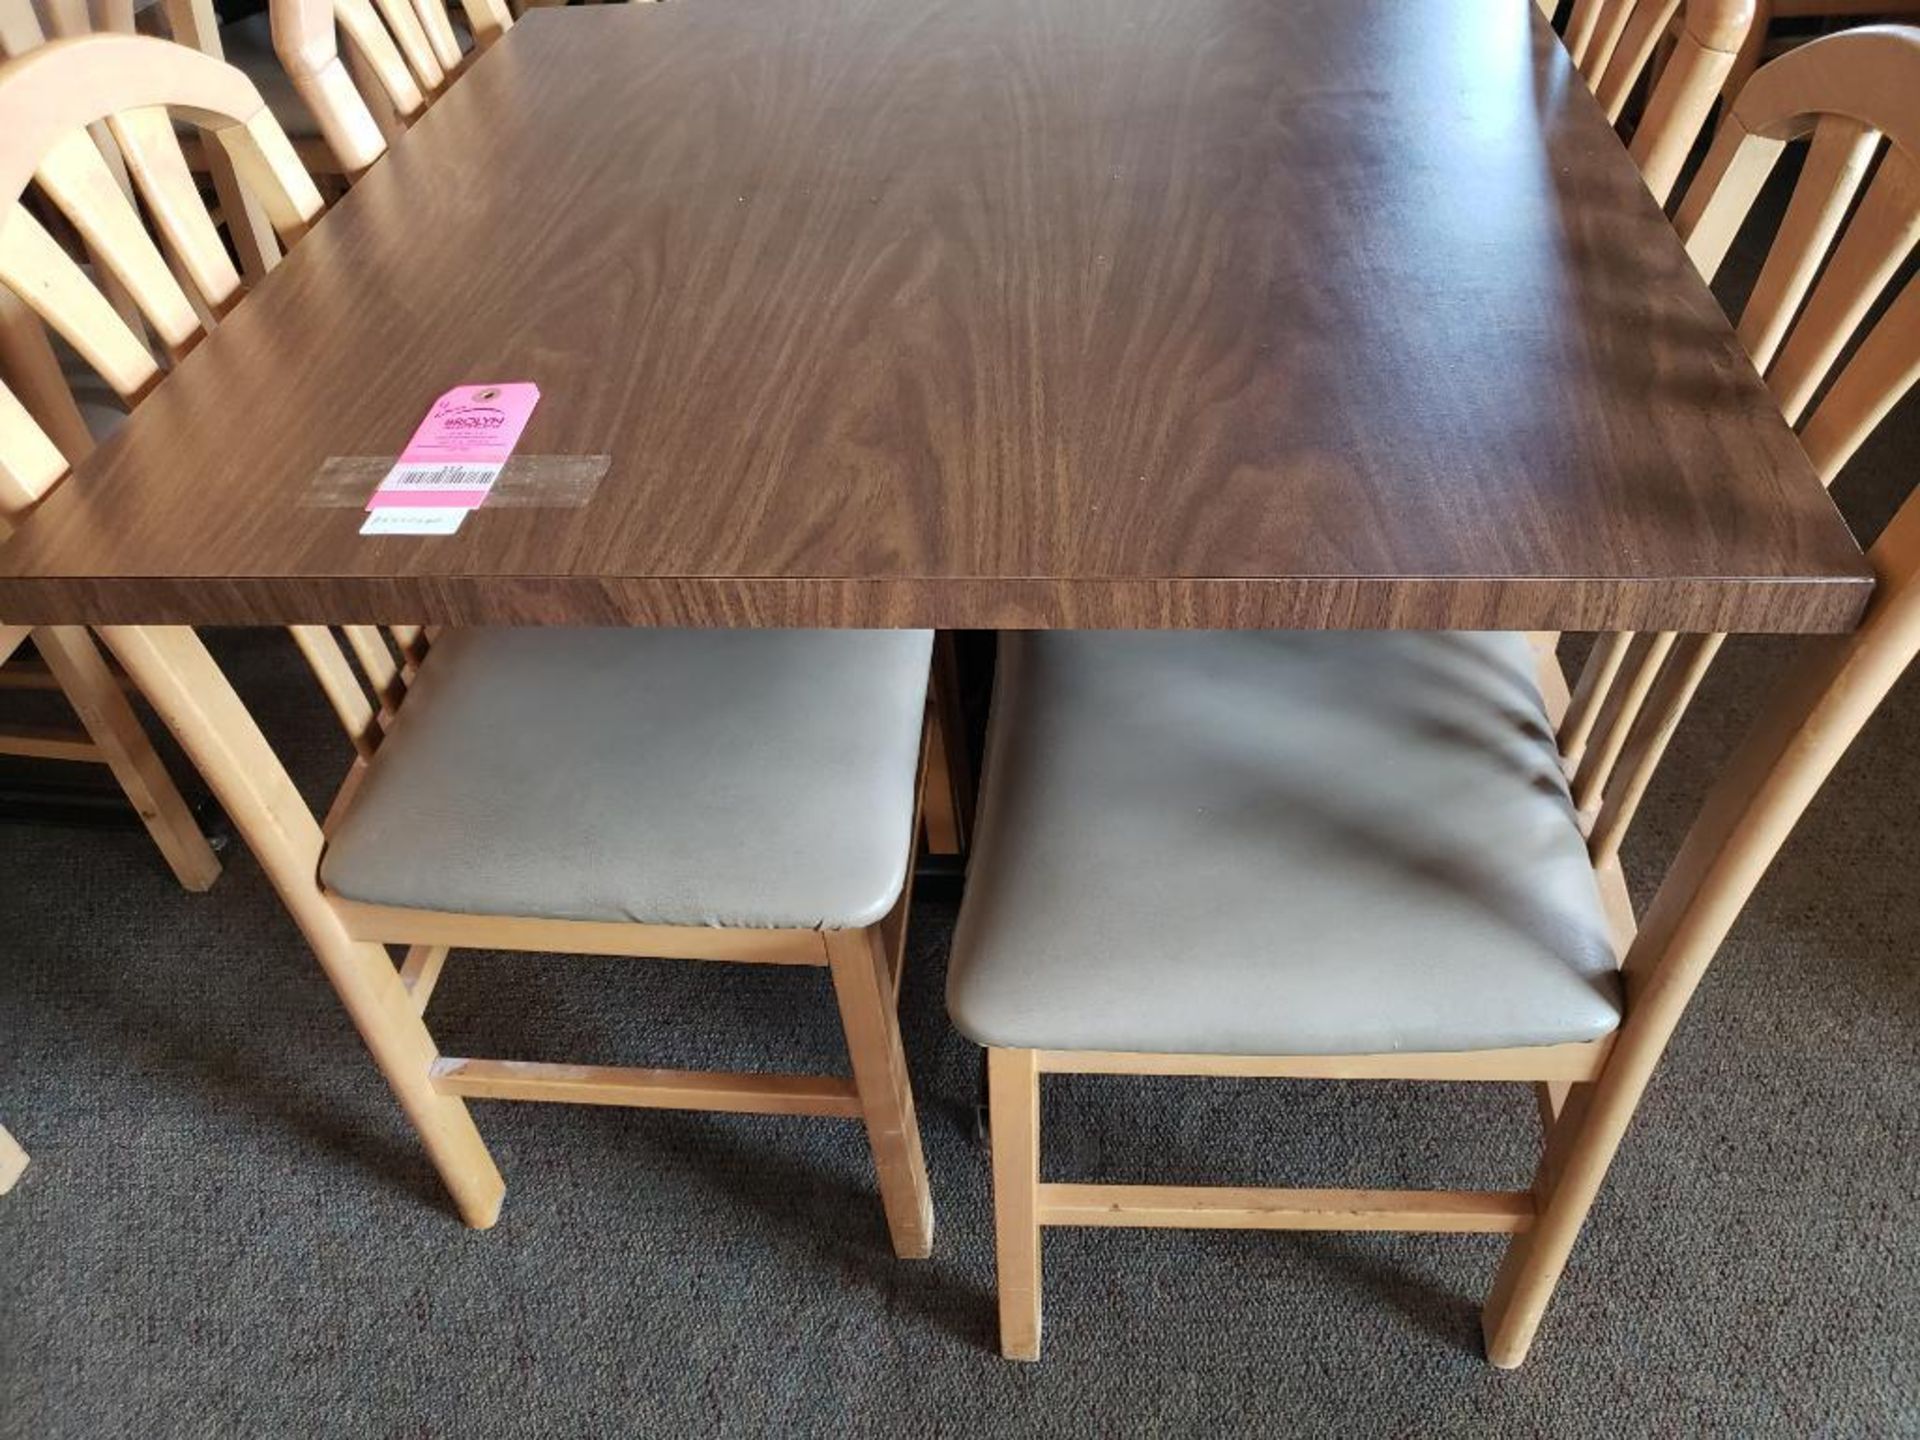 Table with 4 chairs. Table size 35in x 35in. - Image 2 of 5